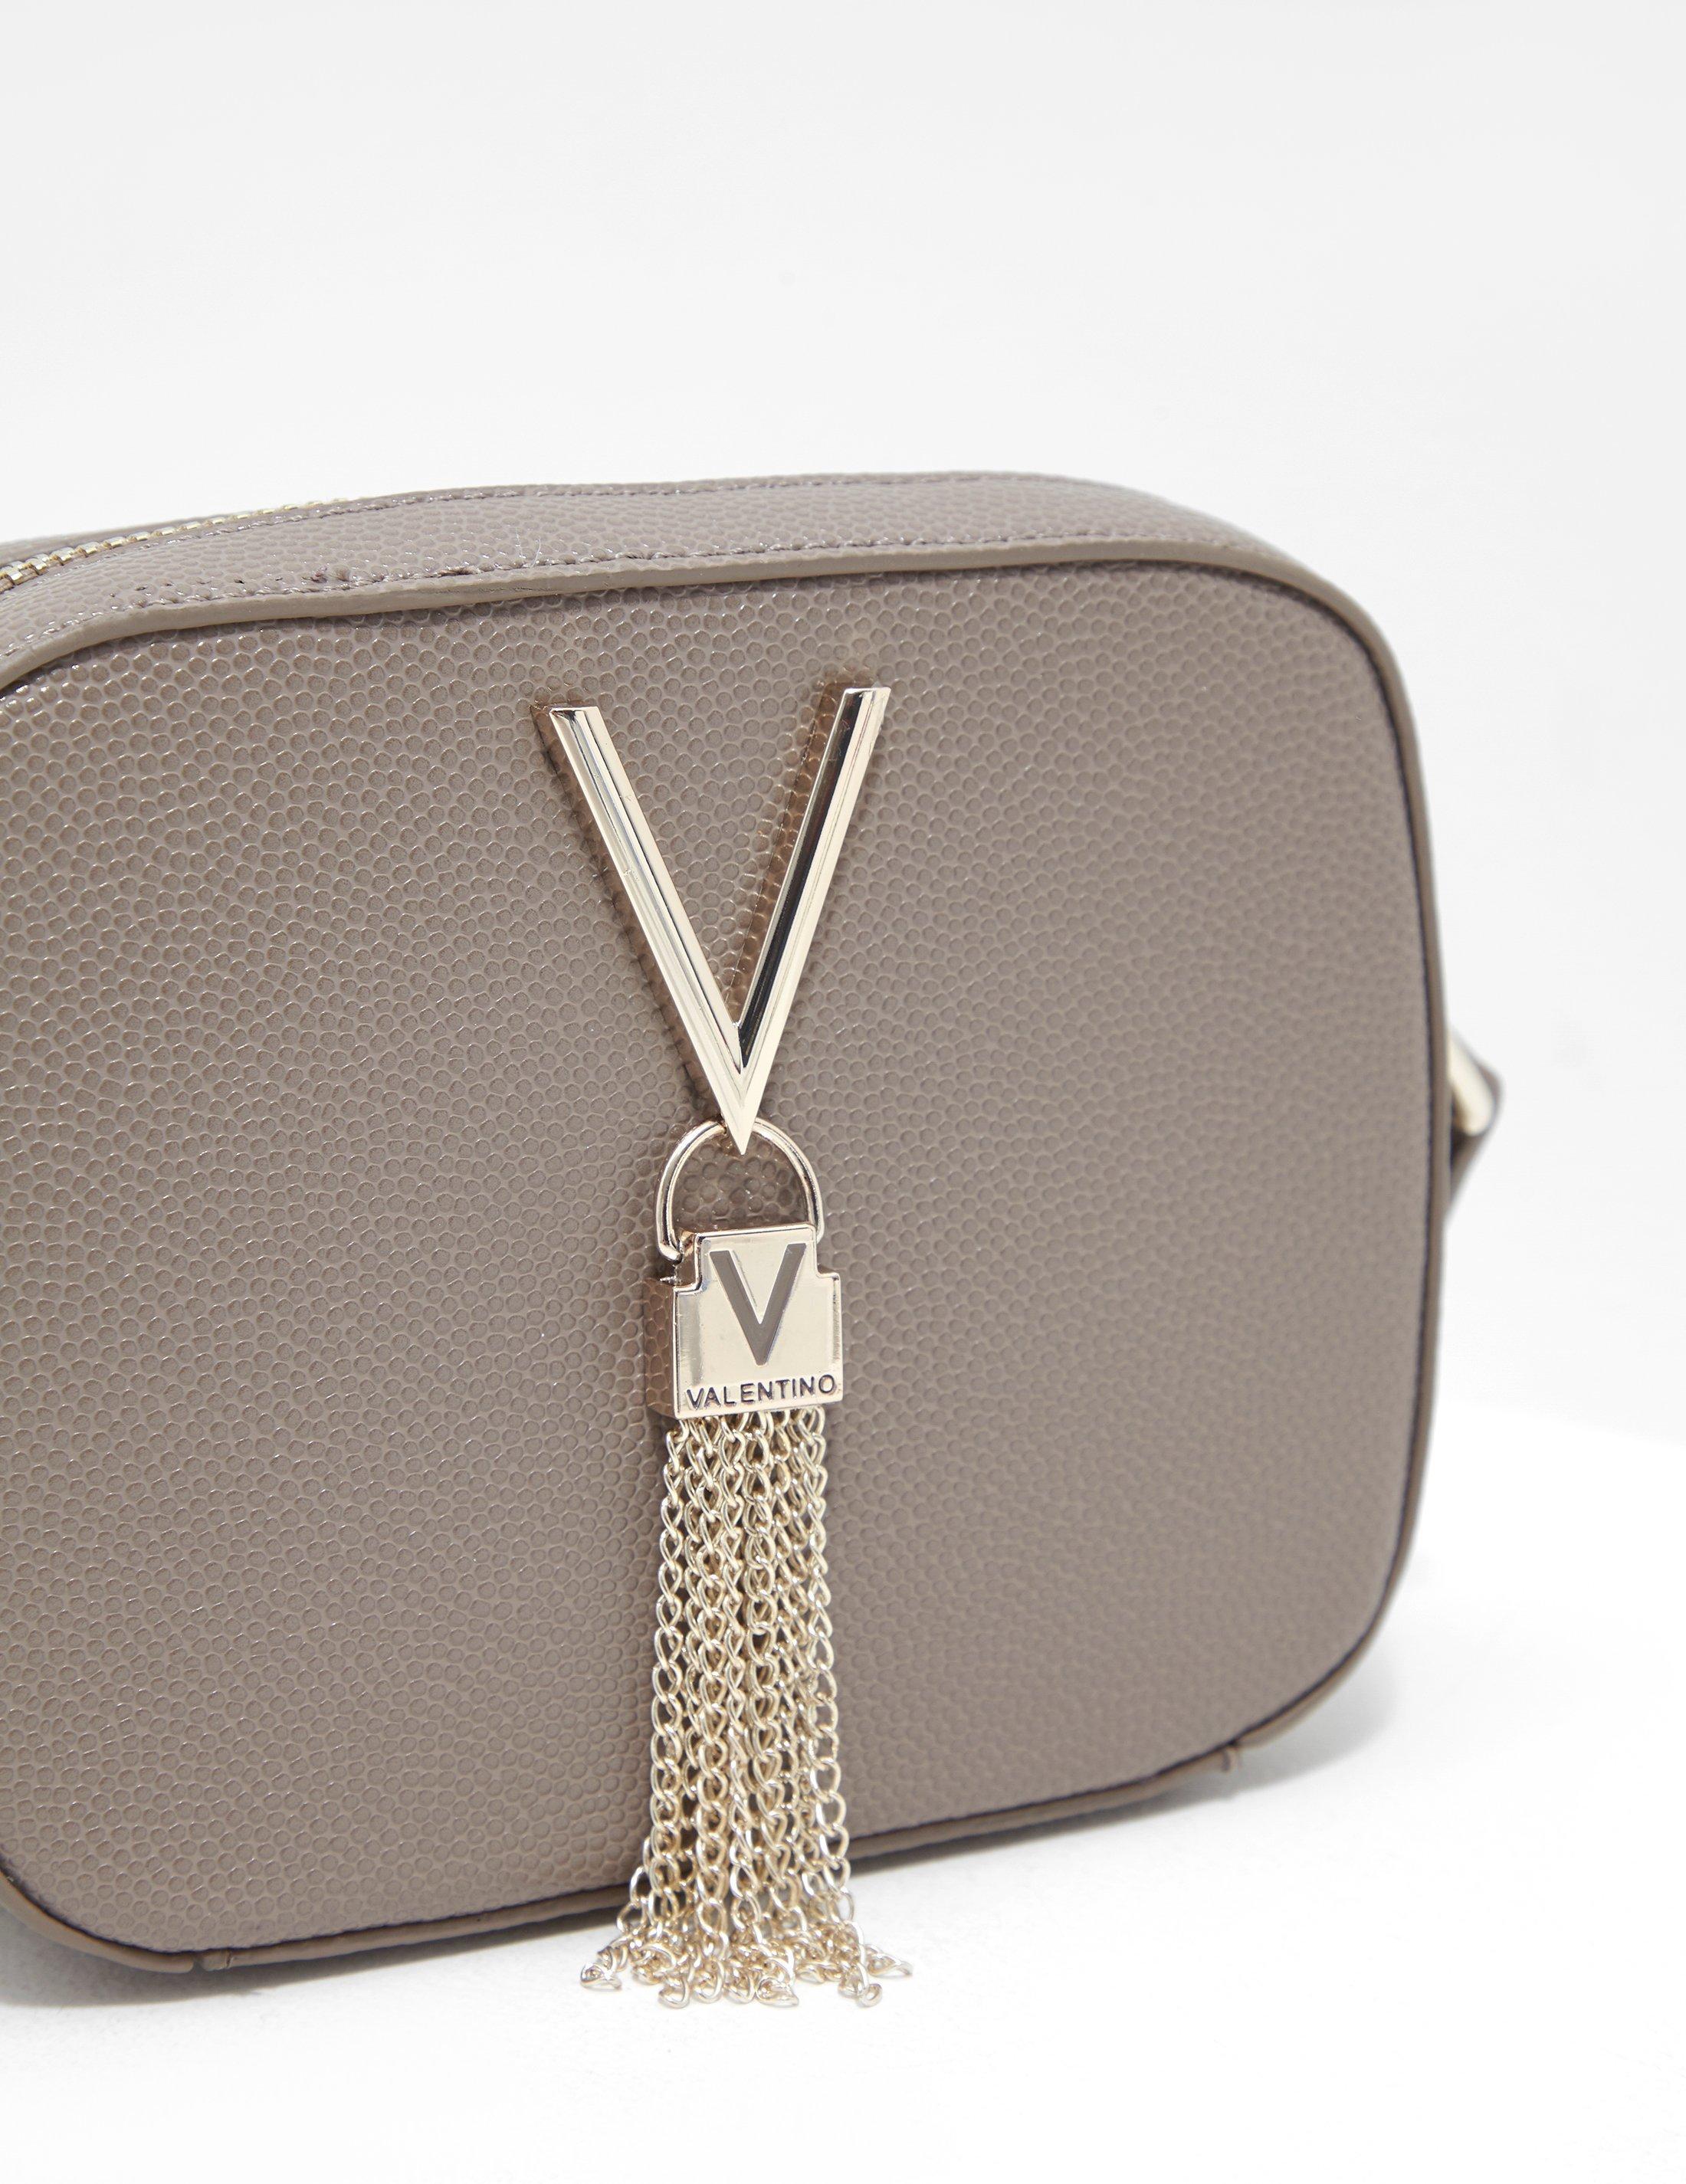 Valentino By Mario Valentino Leather Divina Camera Bag Nude/nude in Natural  - Lyst